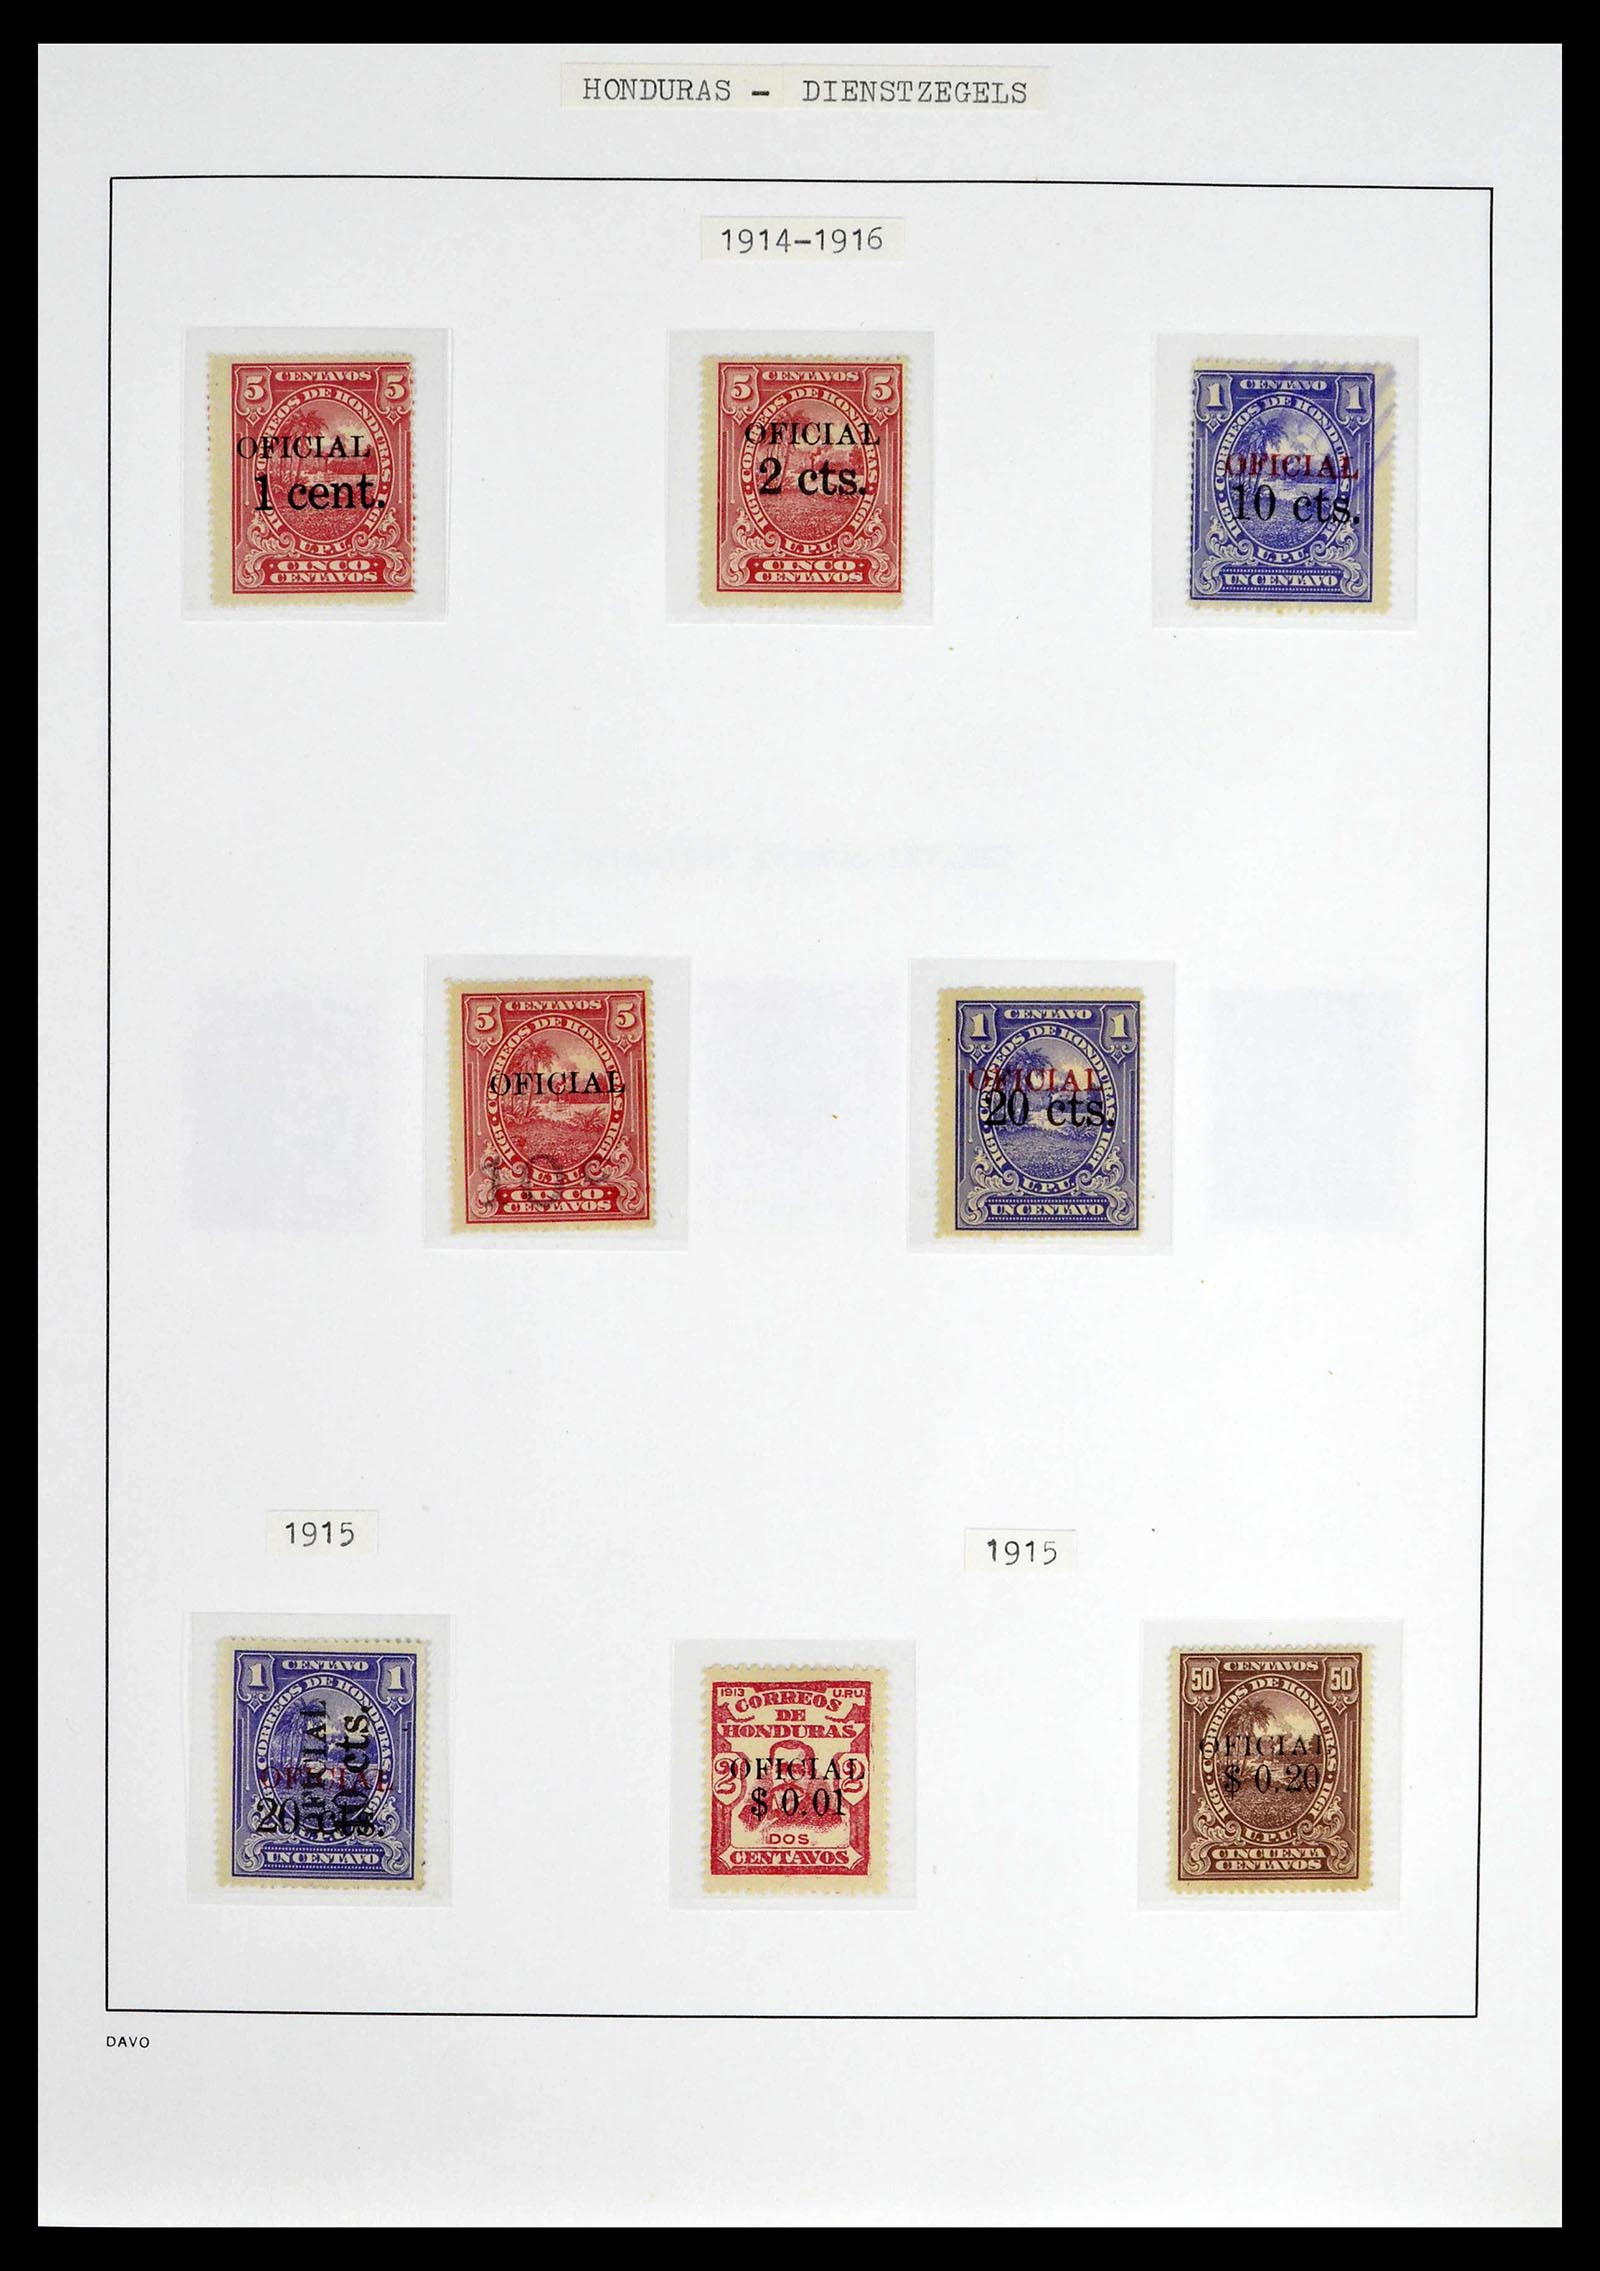 39404 0013 - Stamp collection 39404 Honduras service stamps 1890-1974.